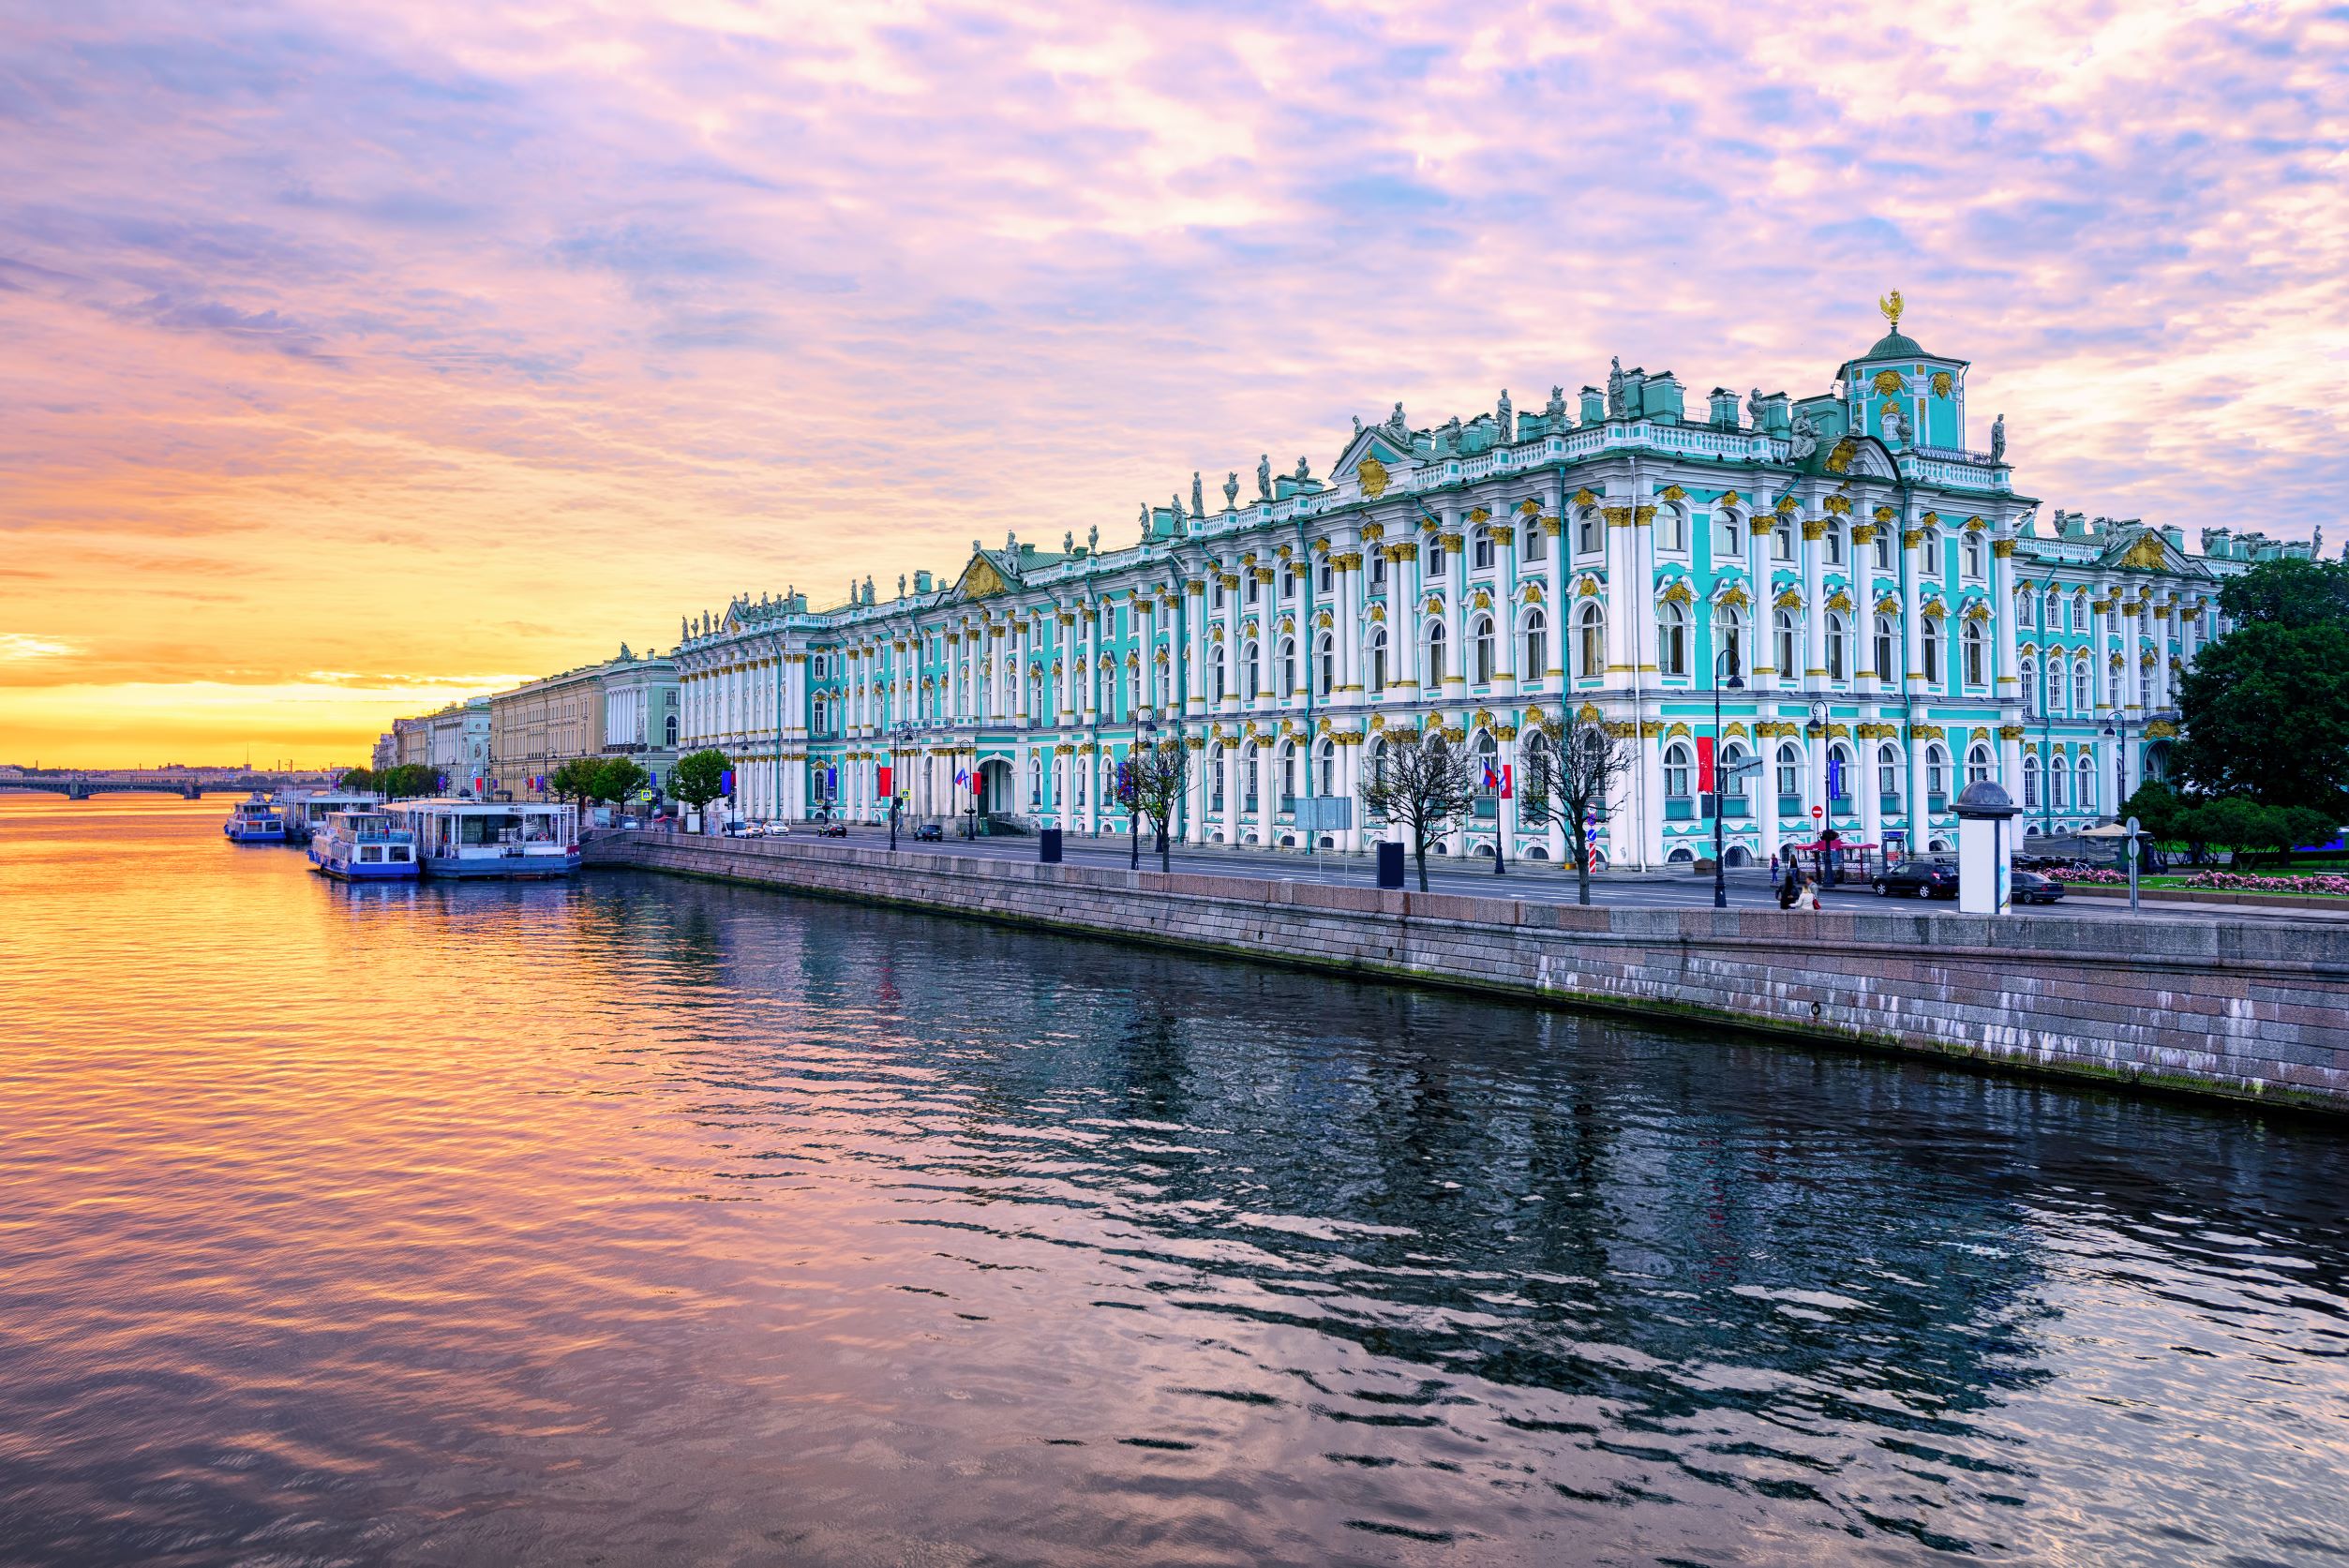 The Hermitage of St. Petersburg: Museum of Art and Architecture 